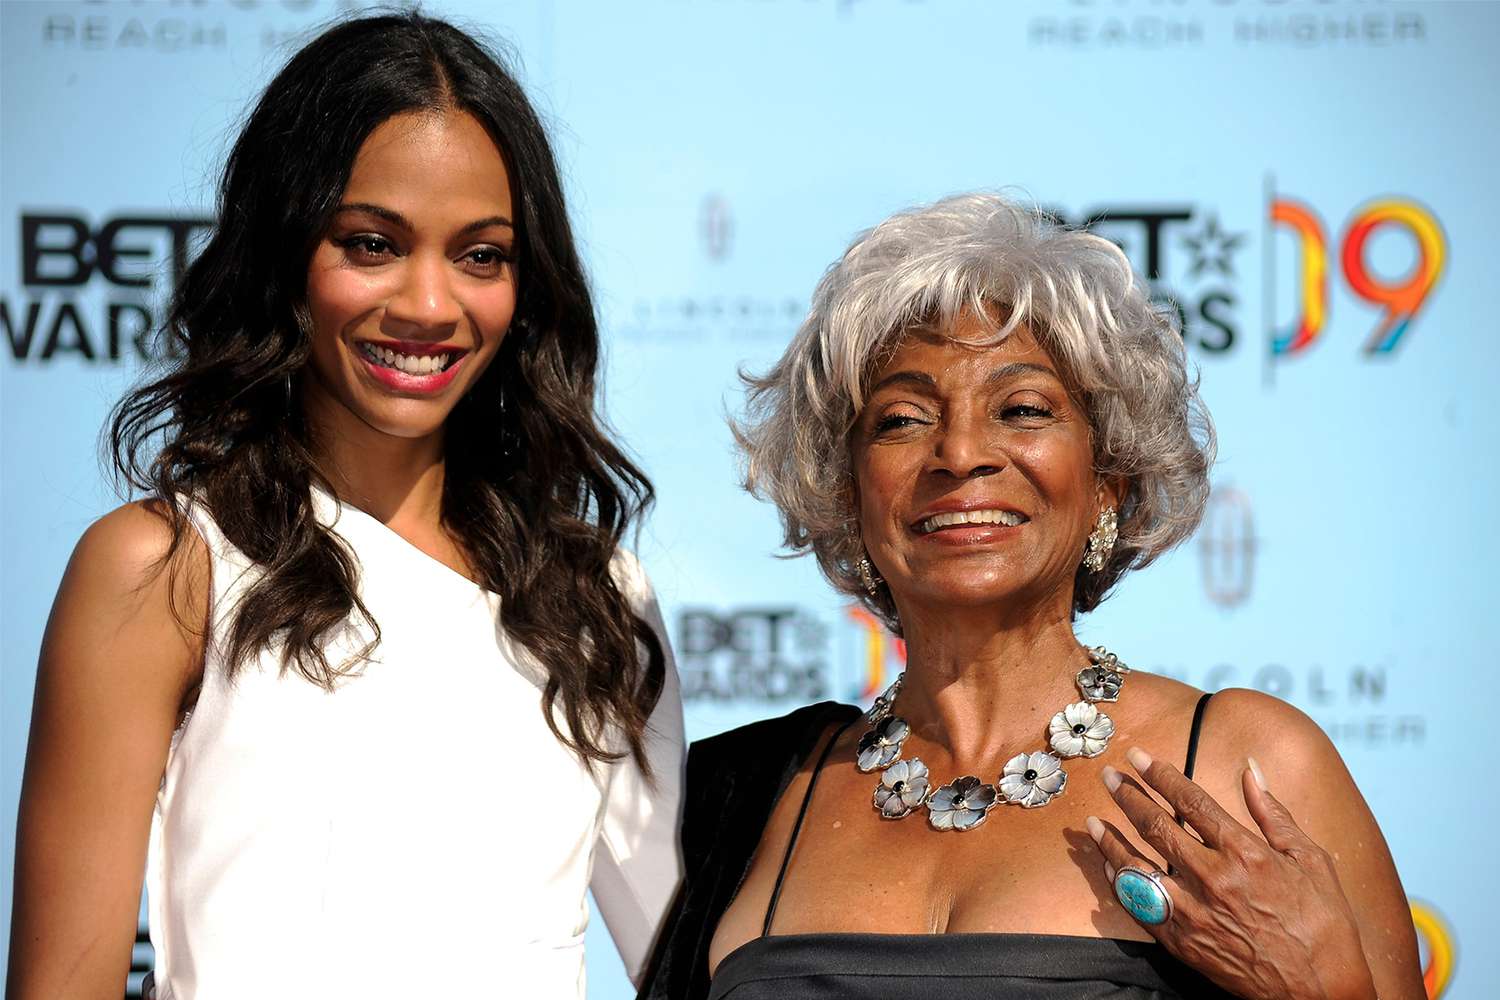 Zoe Saldaña pays tribute to Nichelle Nichols after following in her footsteps as Uhura on 'Star Trek'